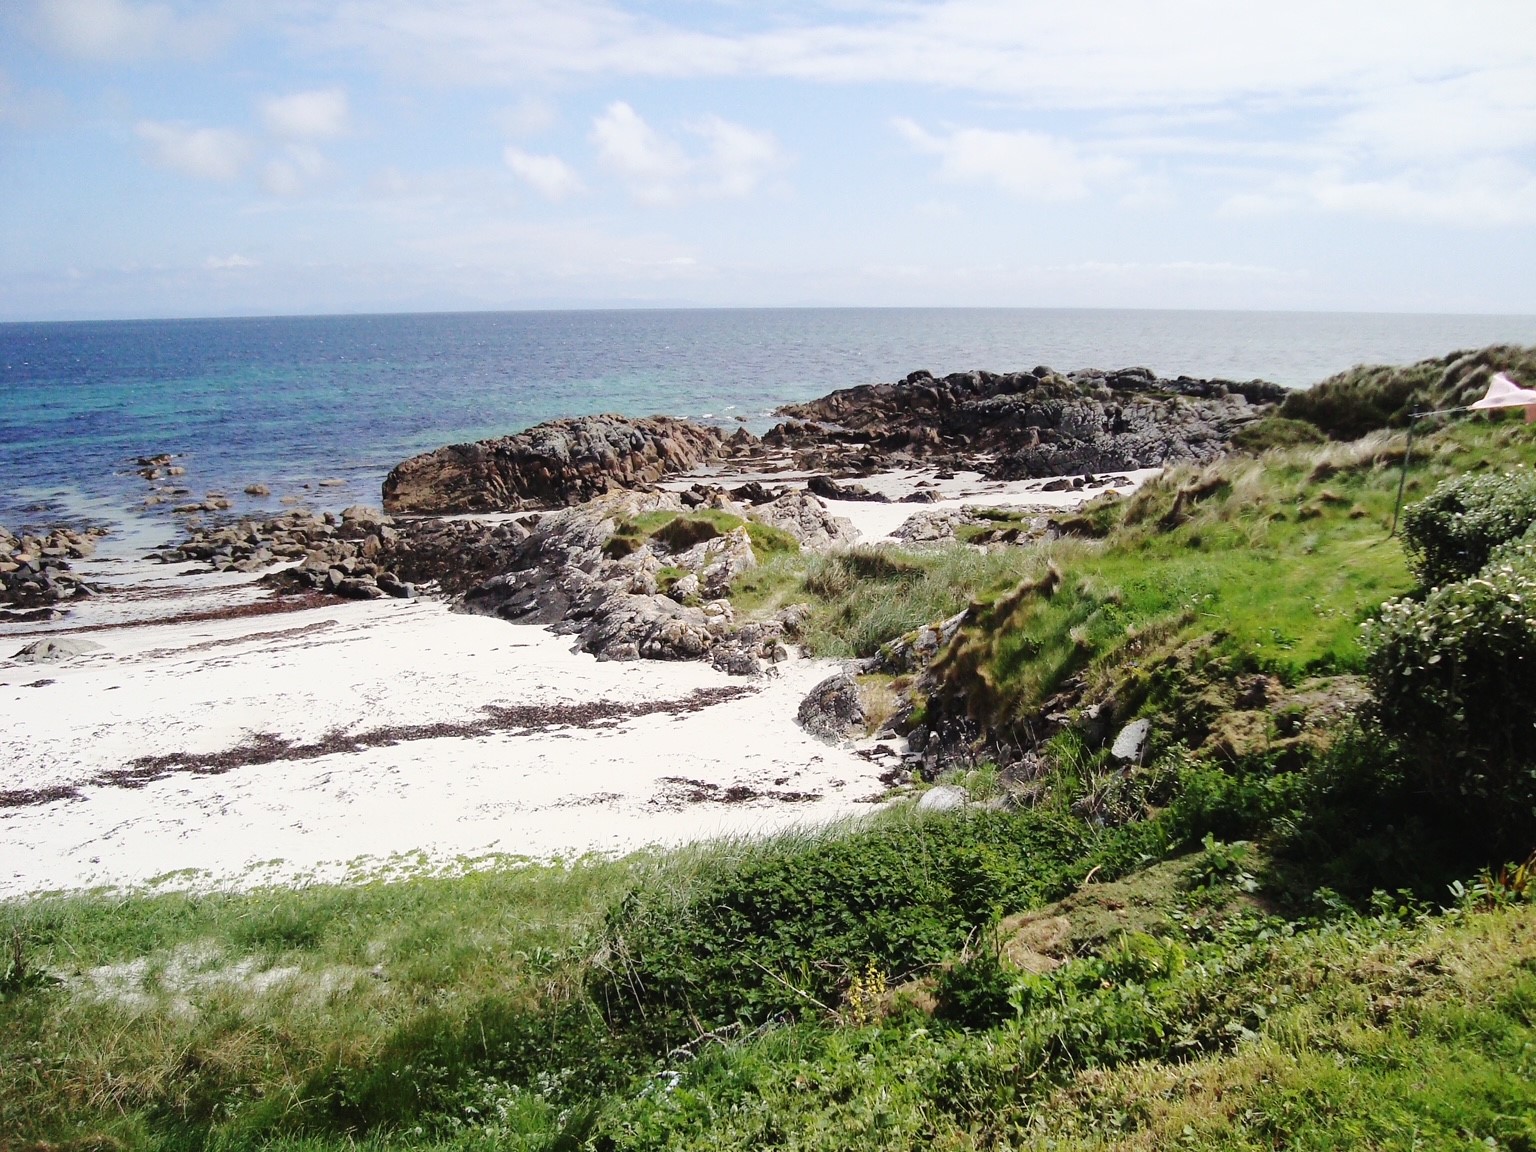 Shore and beach with a view out to the ocean, on Isle of Tiree, Scotland